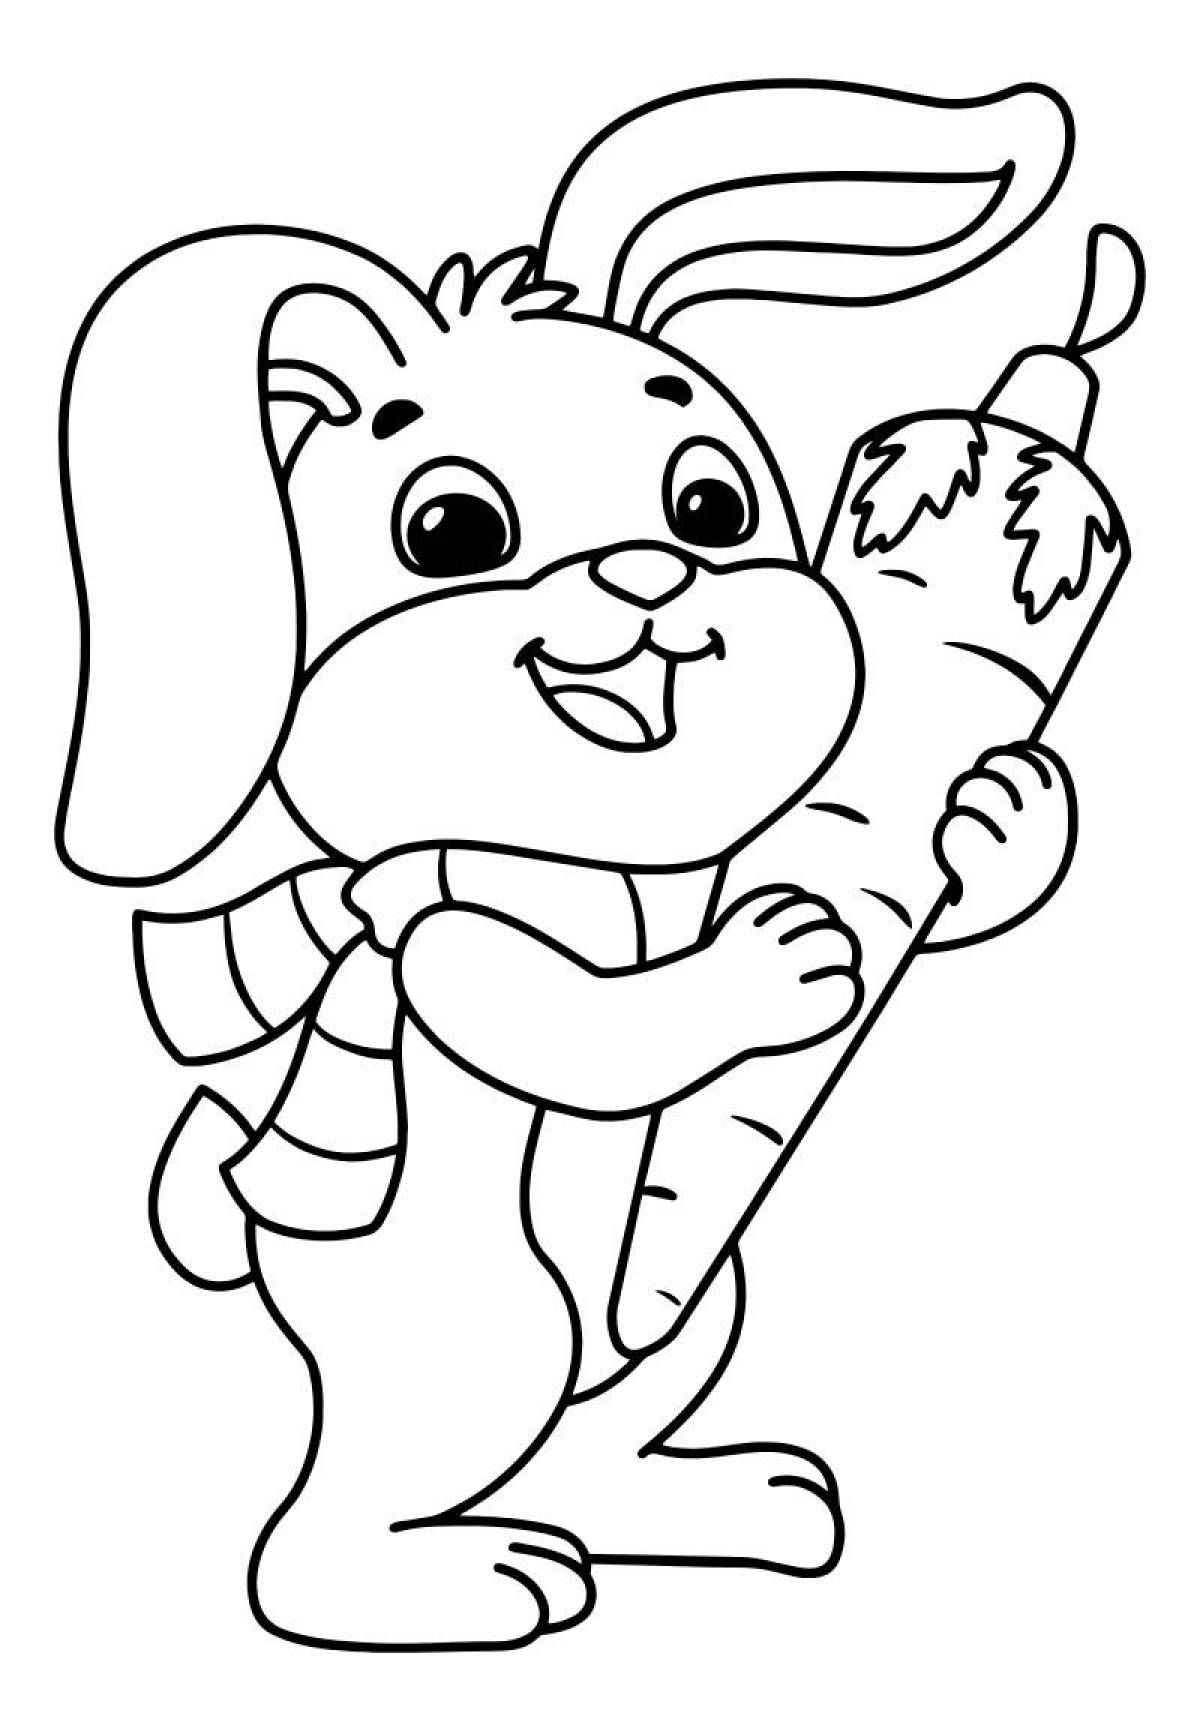 Color-frenzy Christmas bunny coloring page